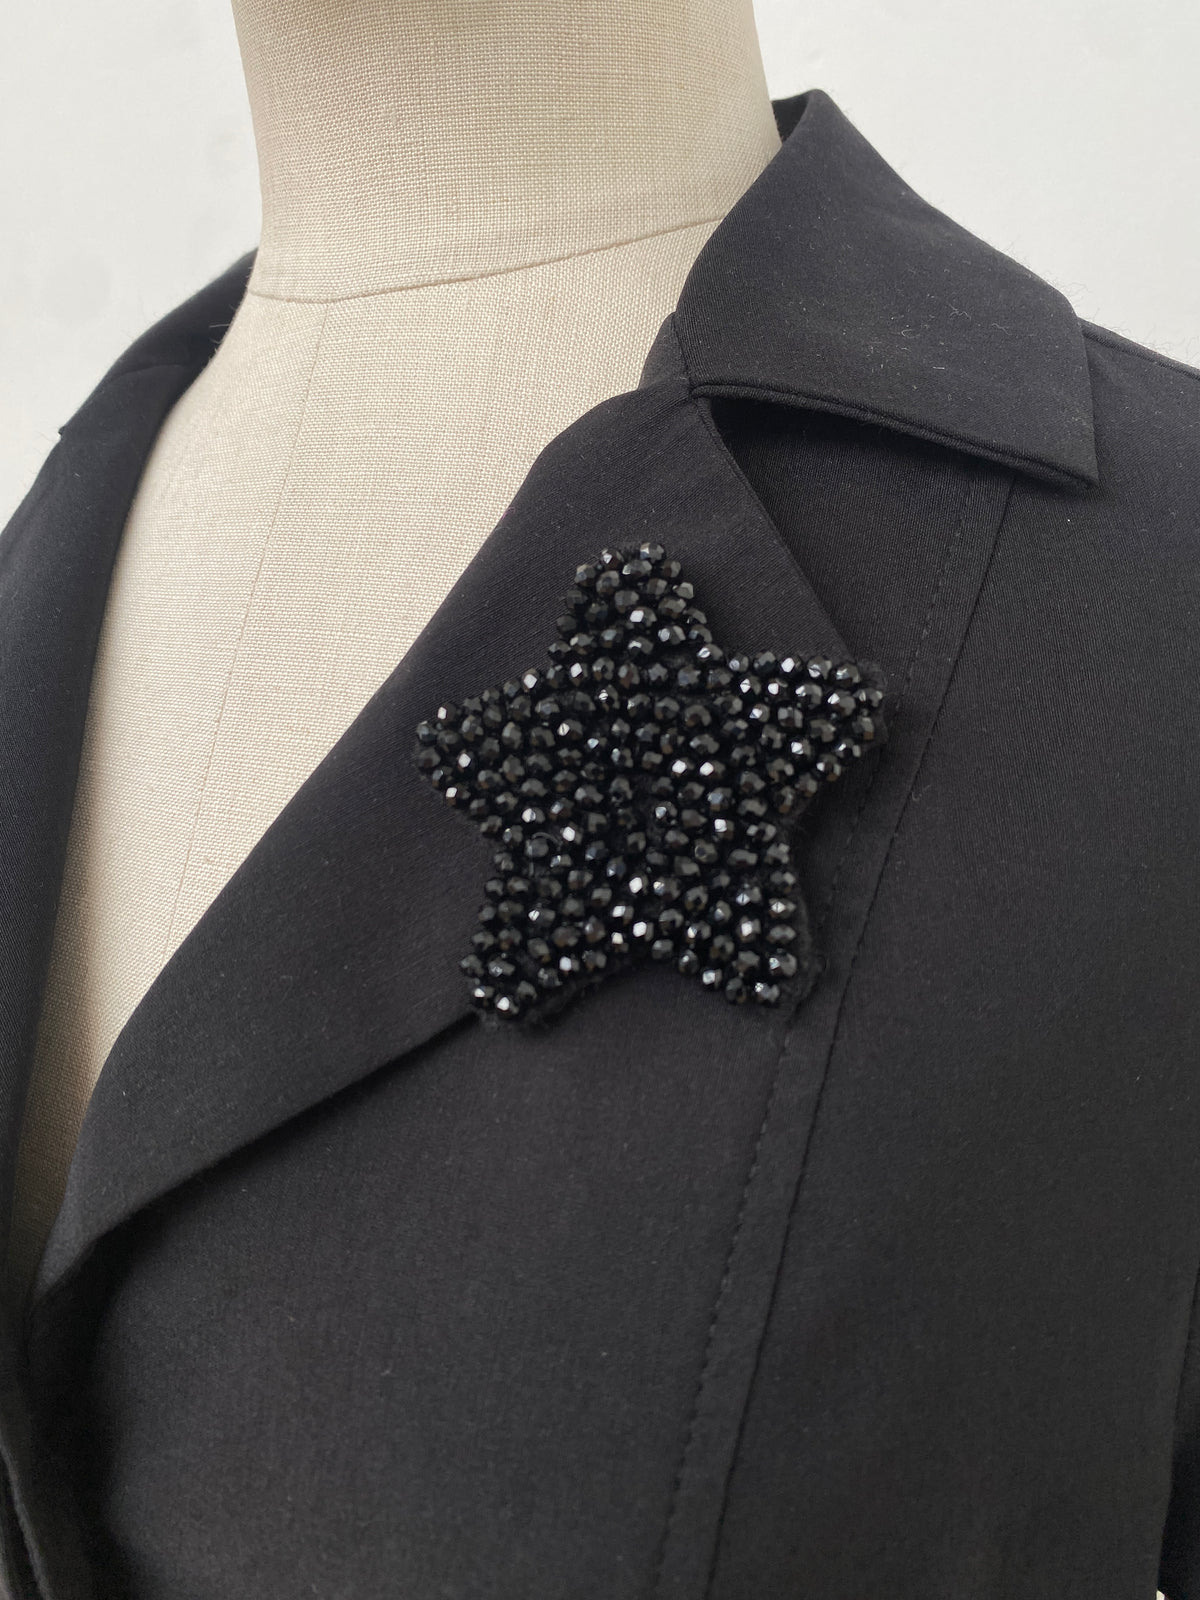 0002 - Couture Star Brooch in Black